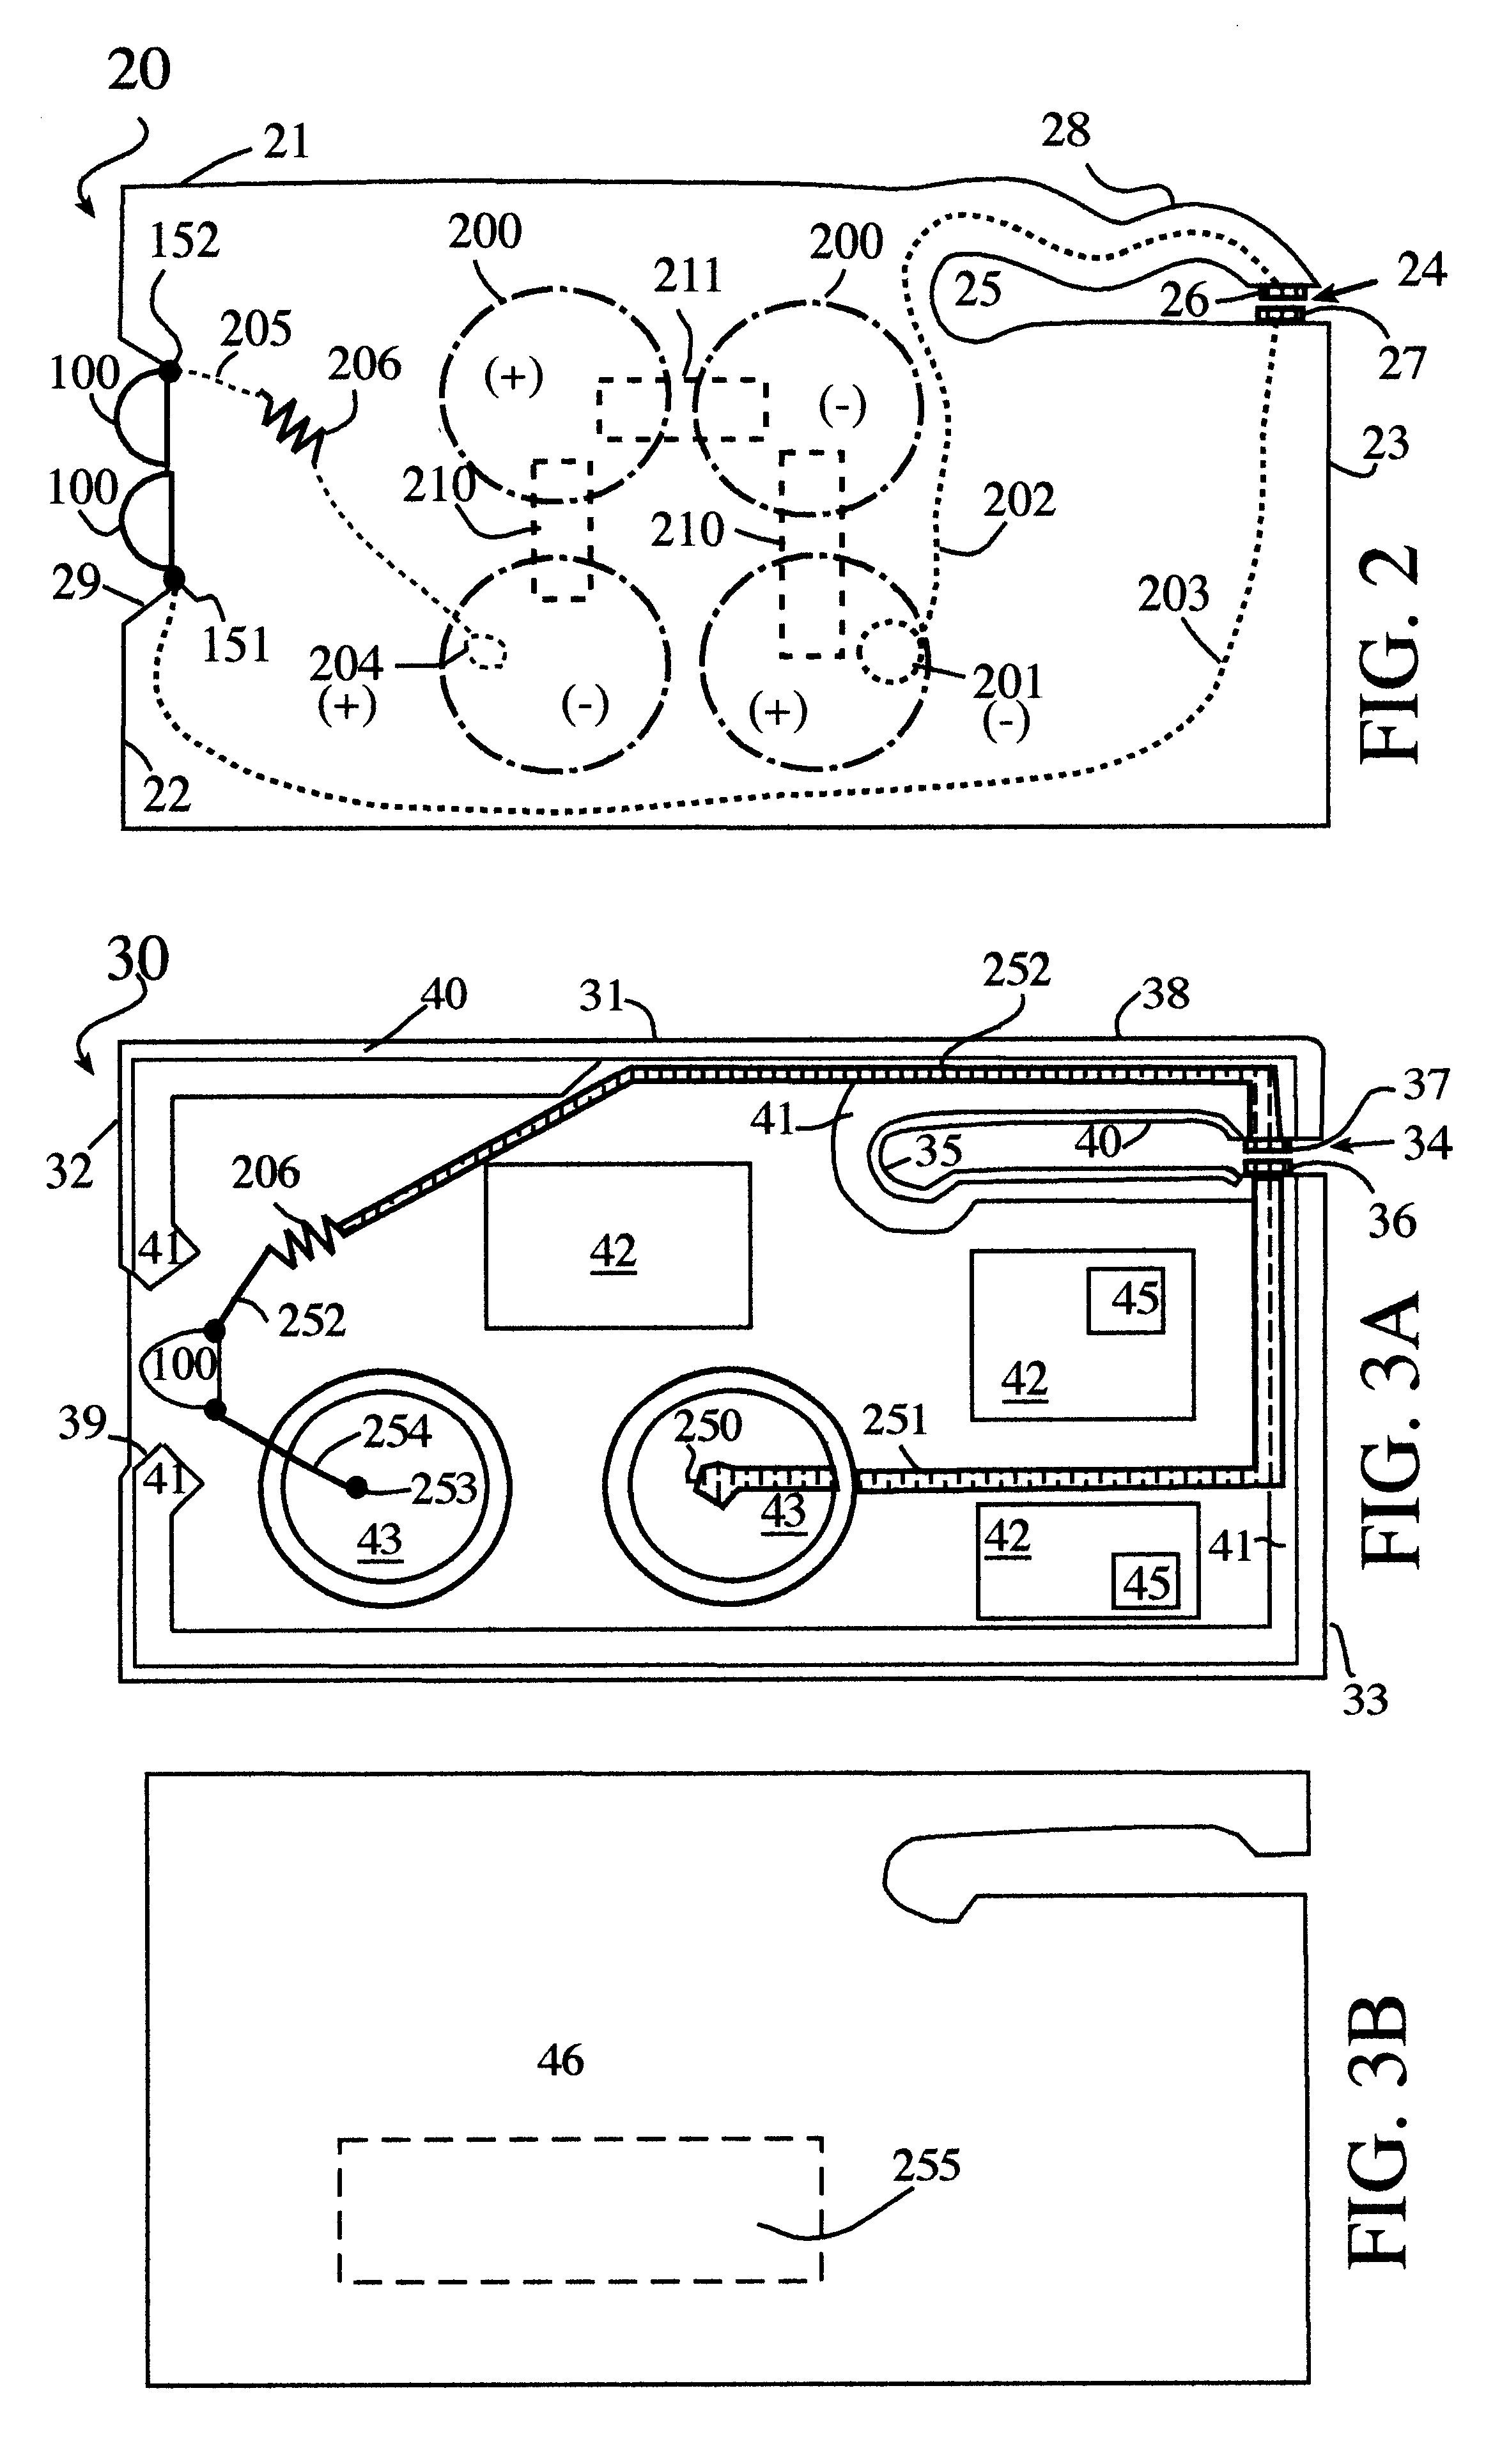 Flat credit card illuminator with flexible integral switching arm